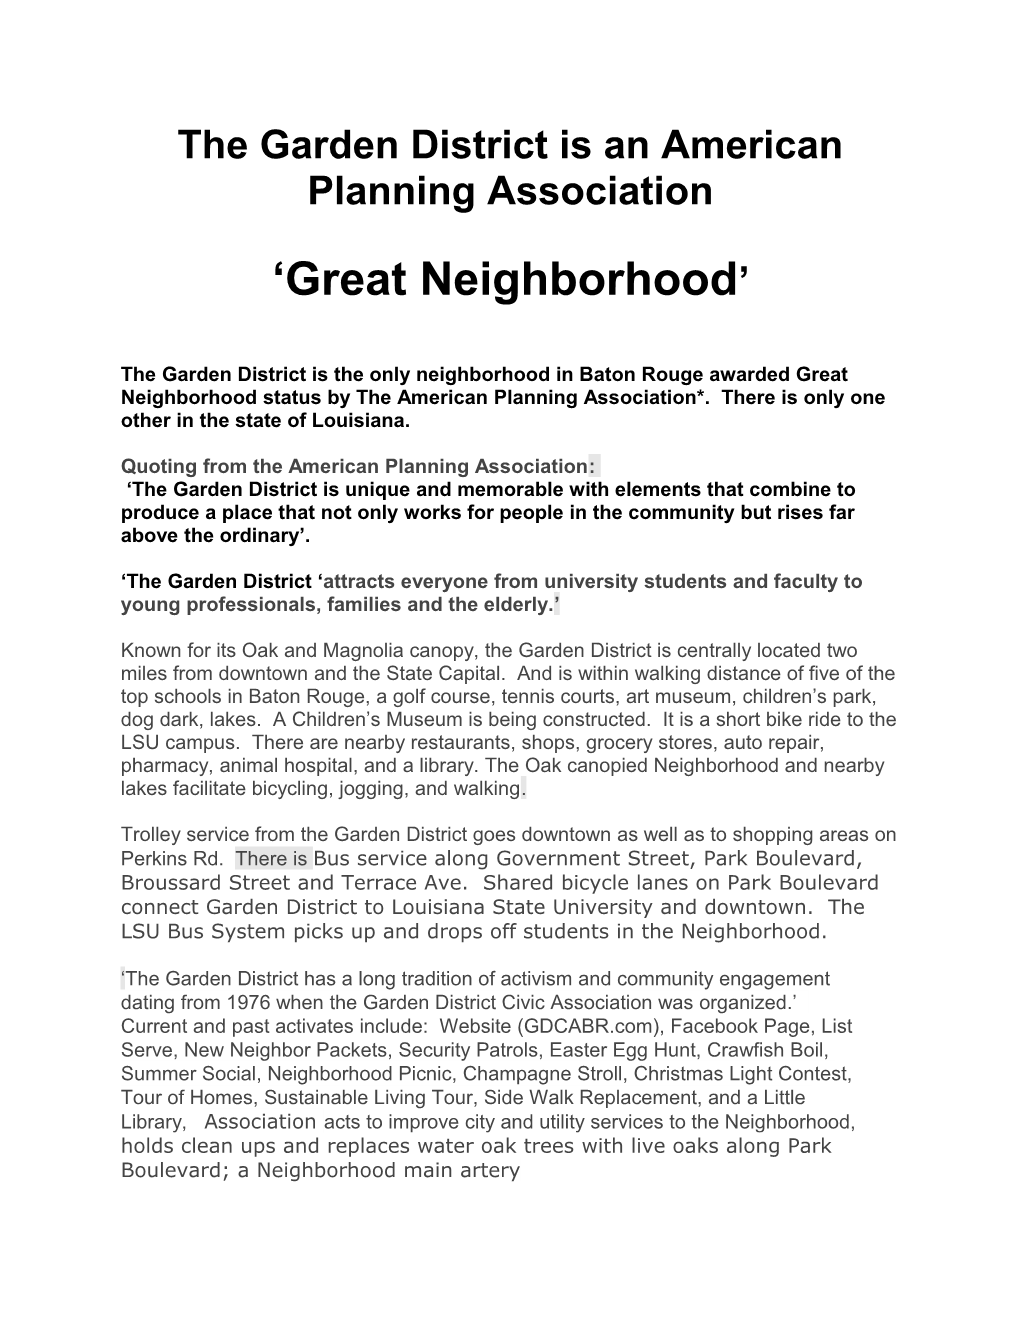 The Garden District Is an American Planning Association